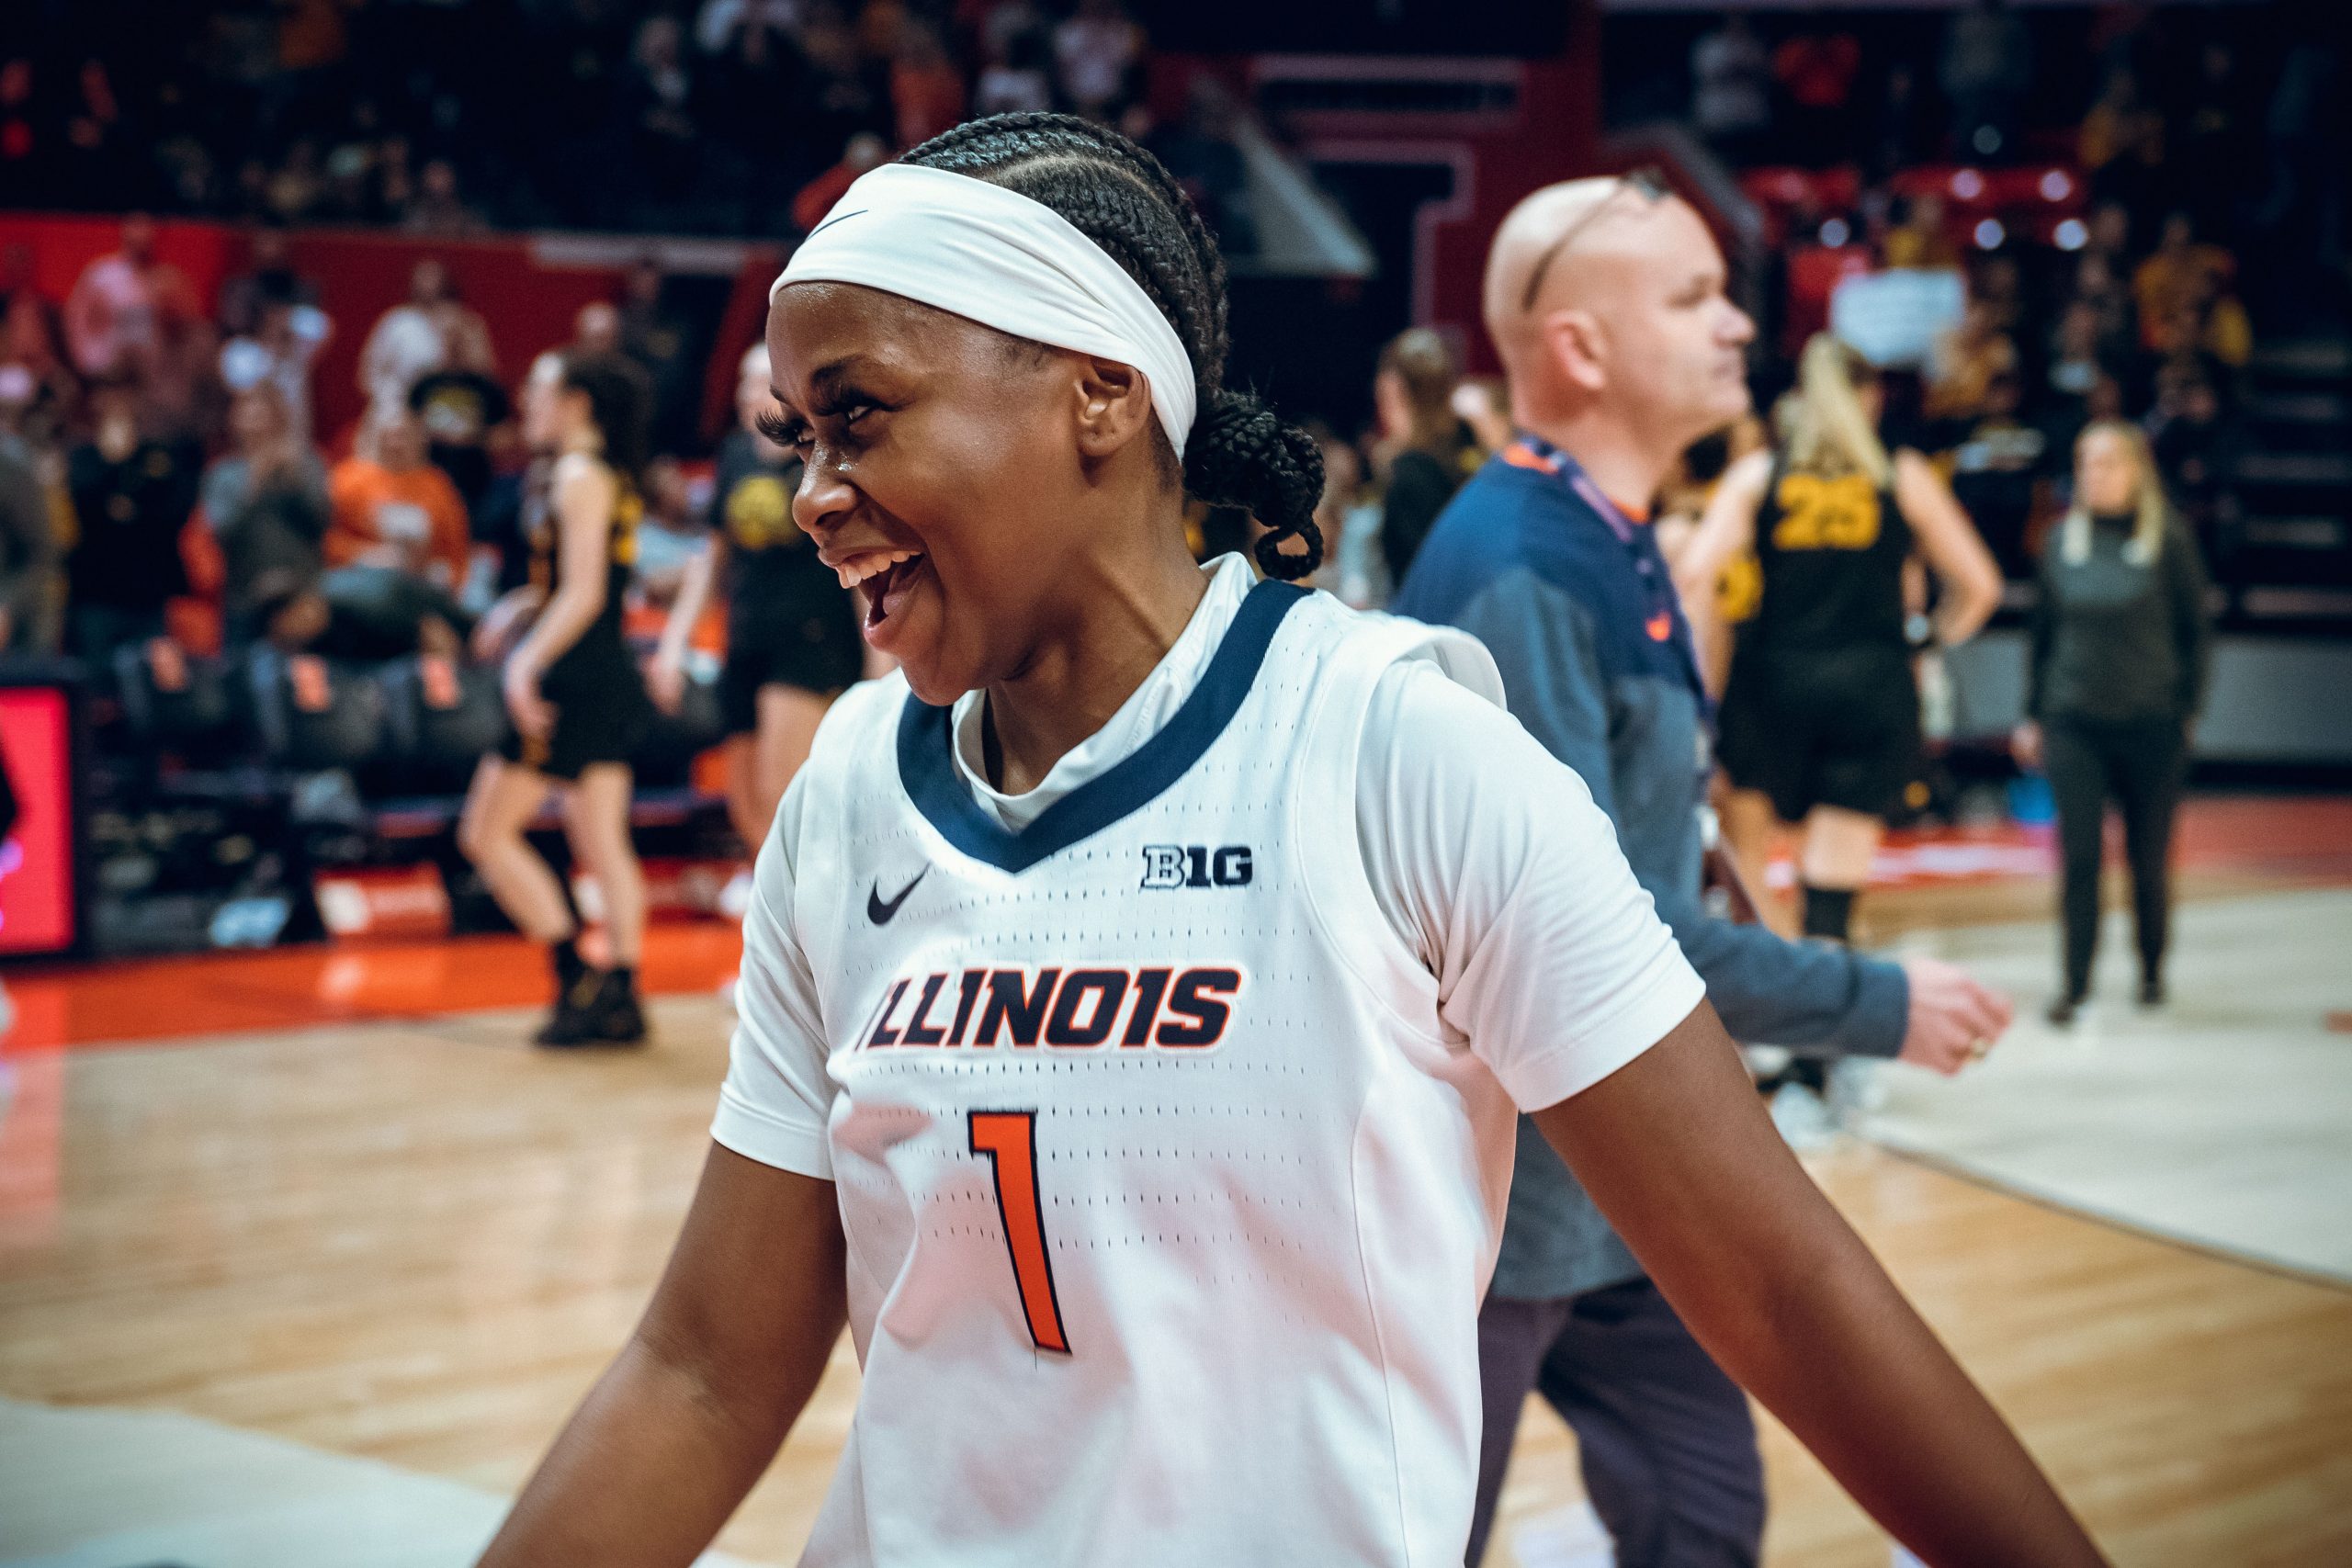 ‘We recruit toughness’: The Moment Genesis Bryant Made Shauna Green Realize Her Culture at Illinois Was Forming